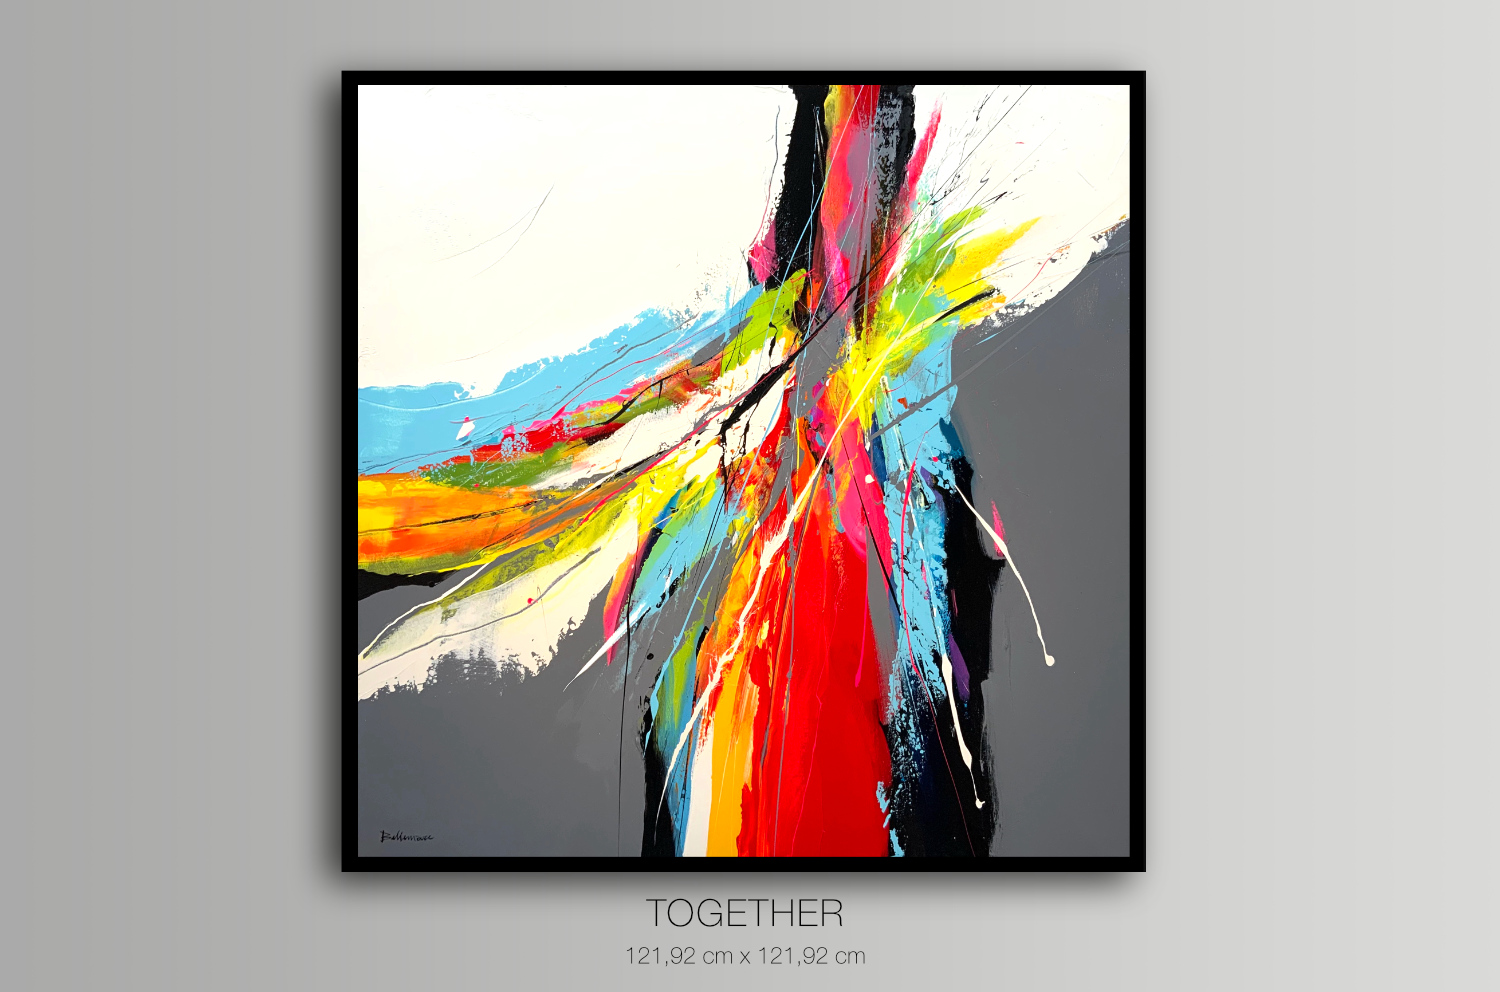 Together - Featured